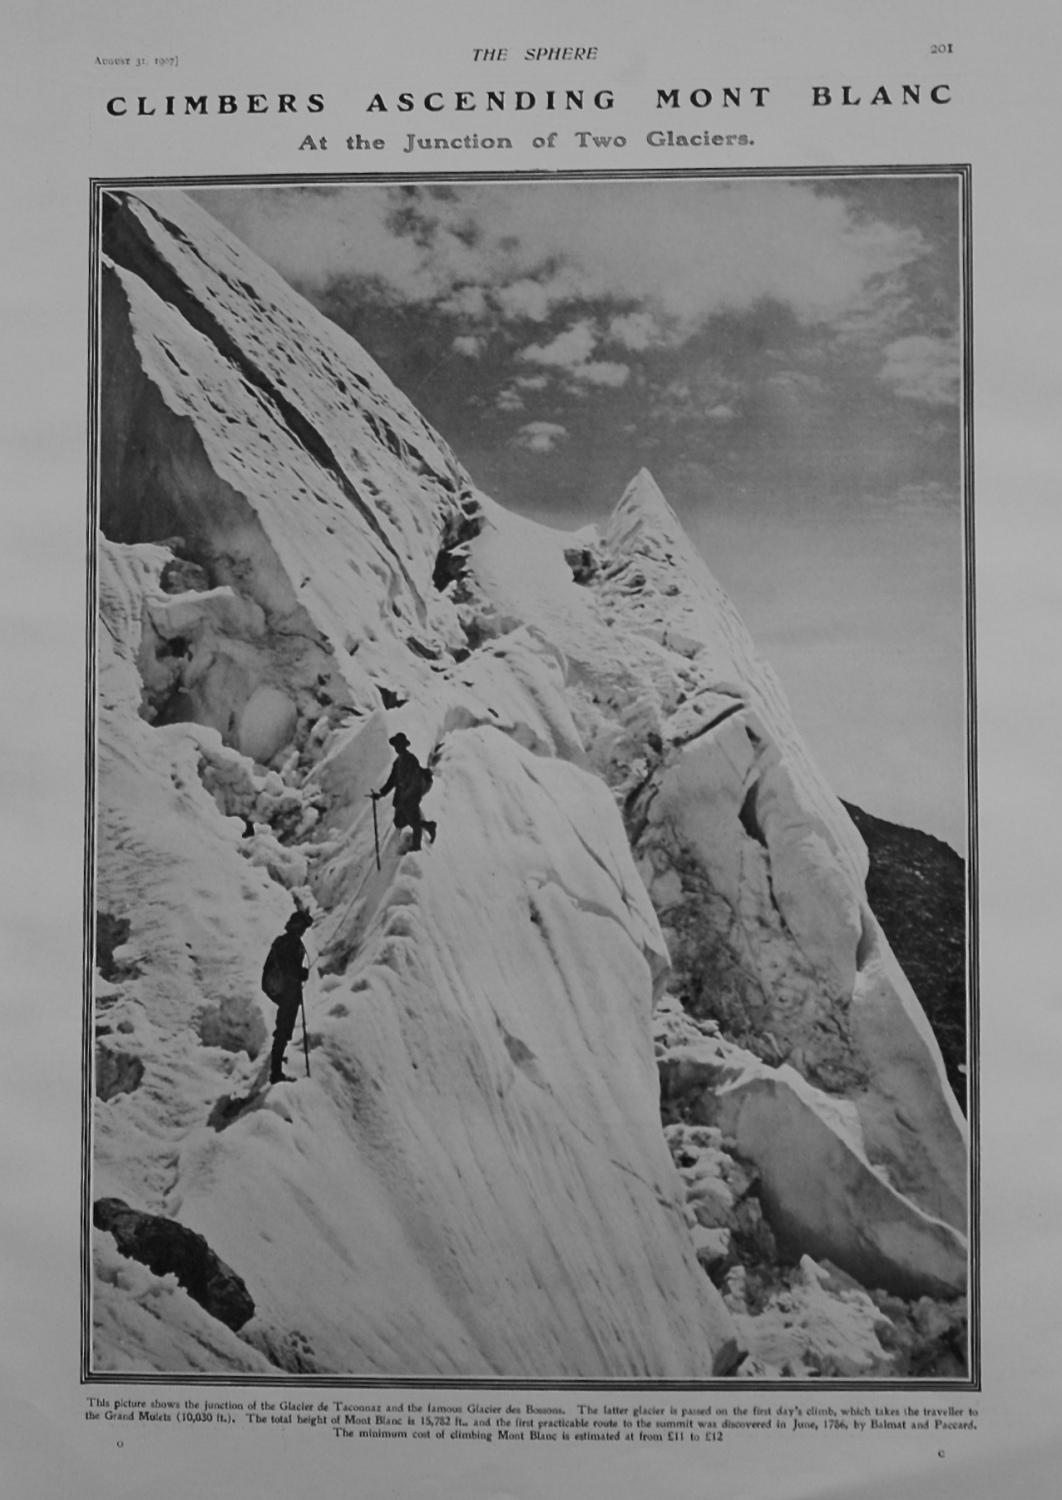 Climbers Ascending Mont Blanc at the junction of Two Glaciers. 1907.